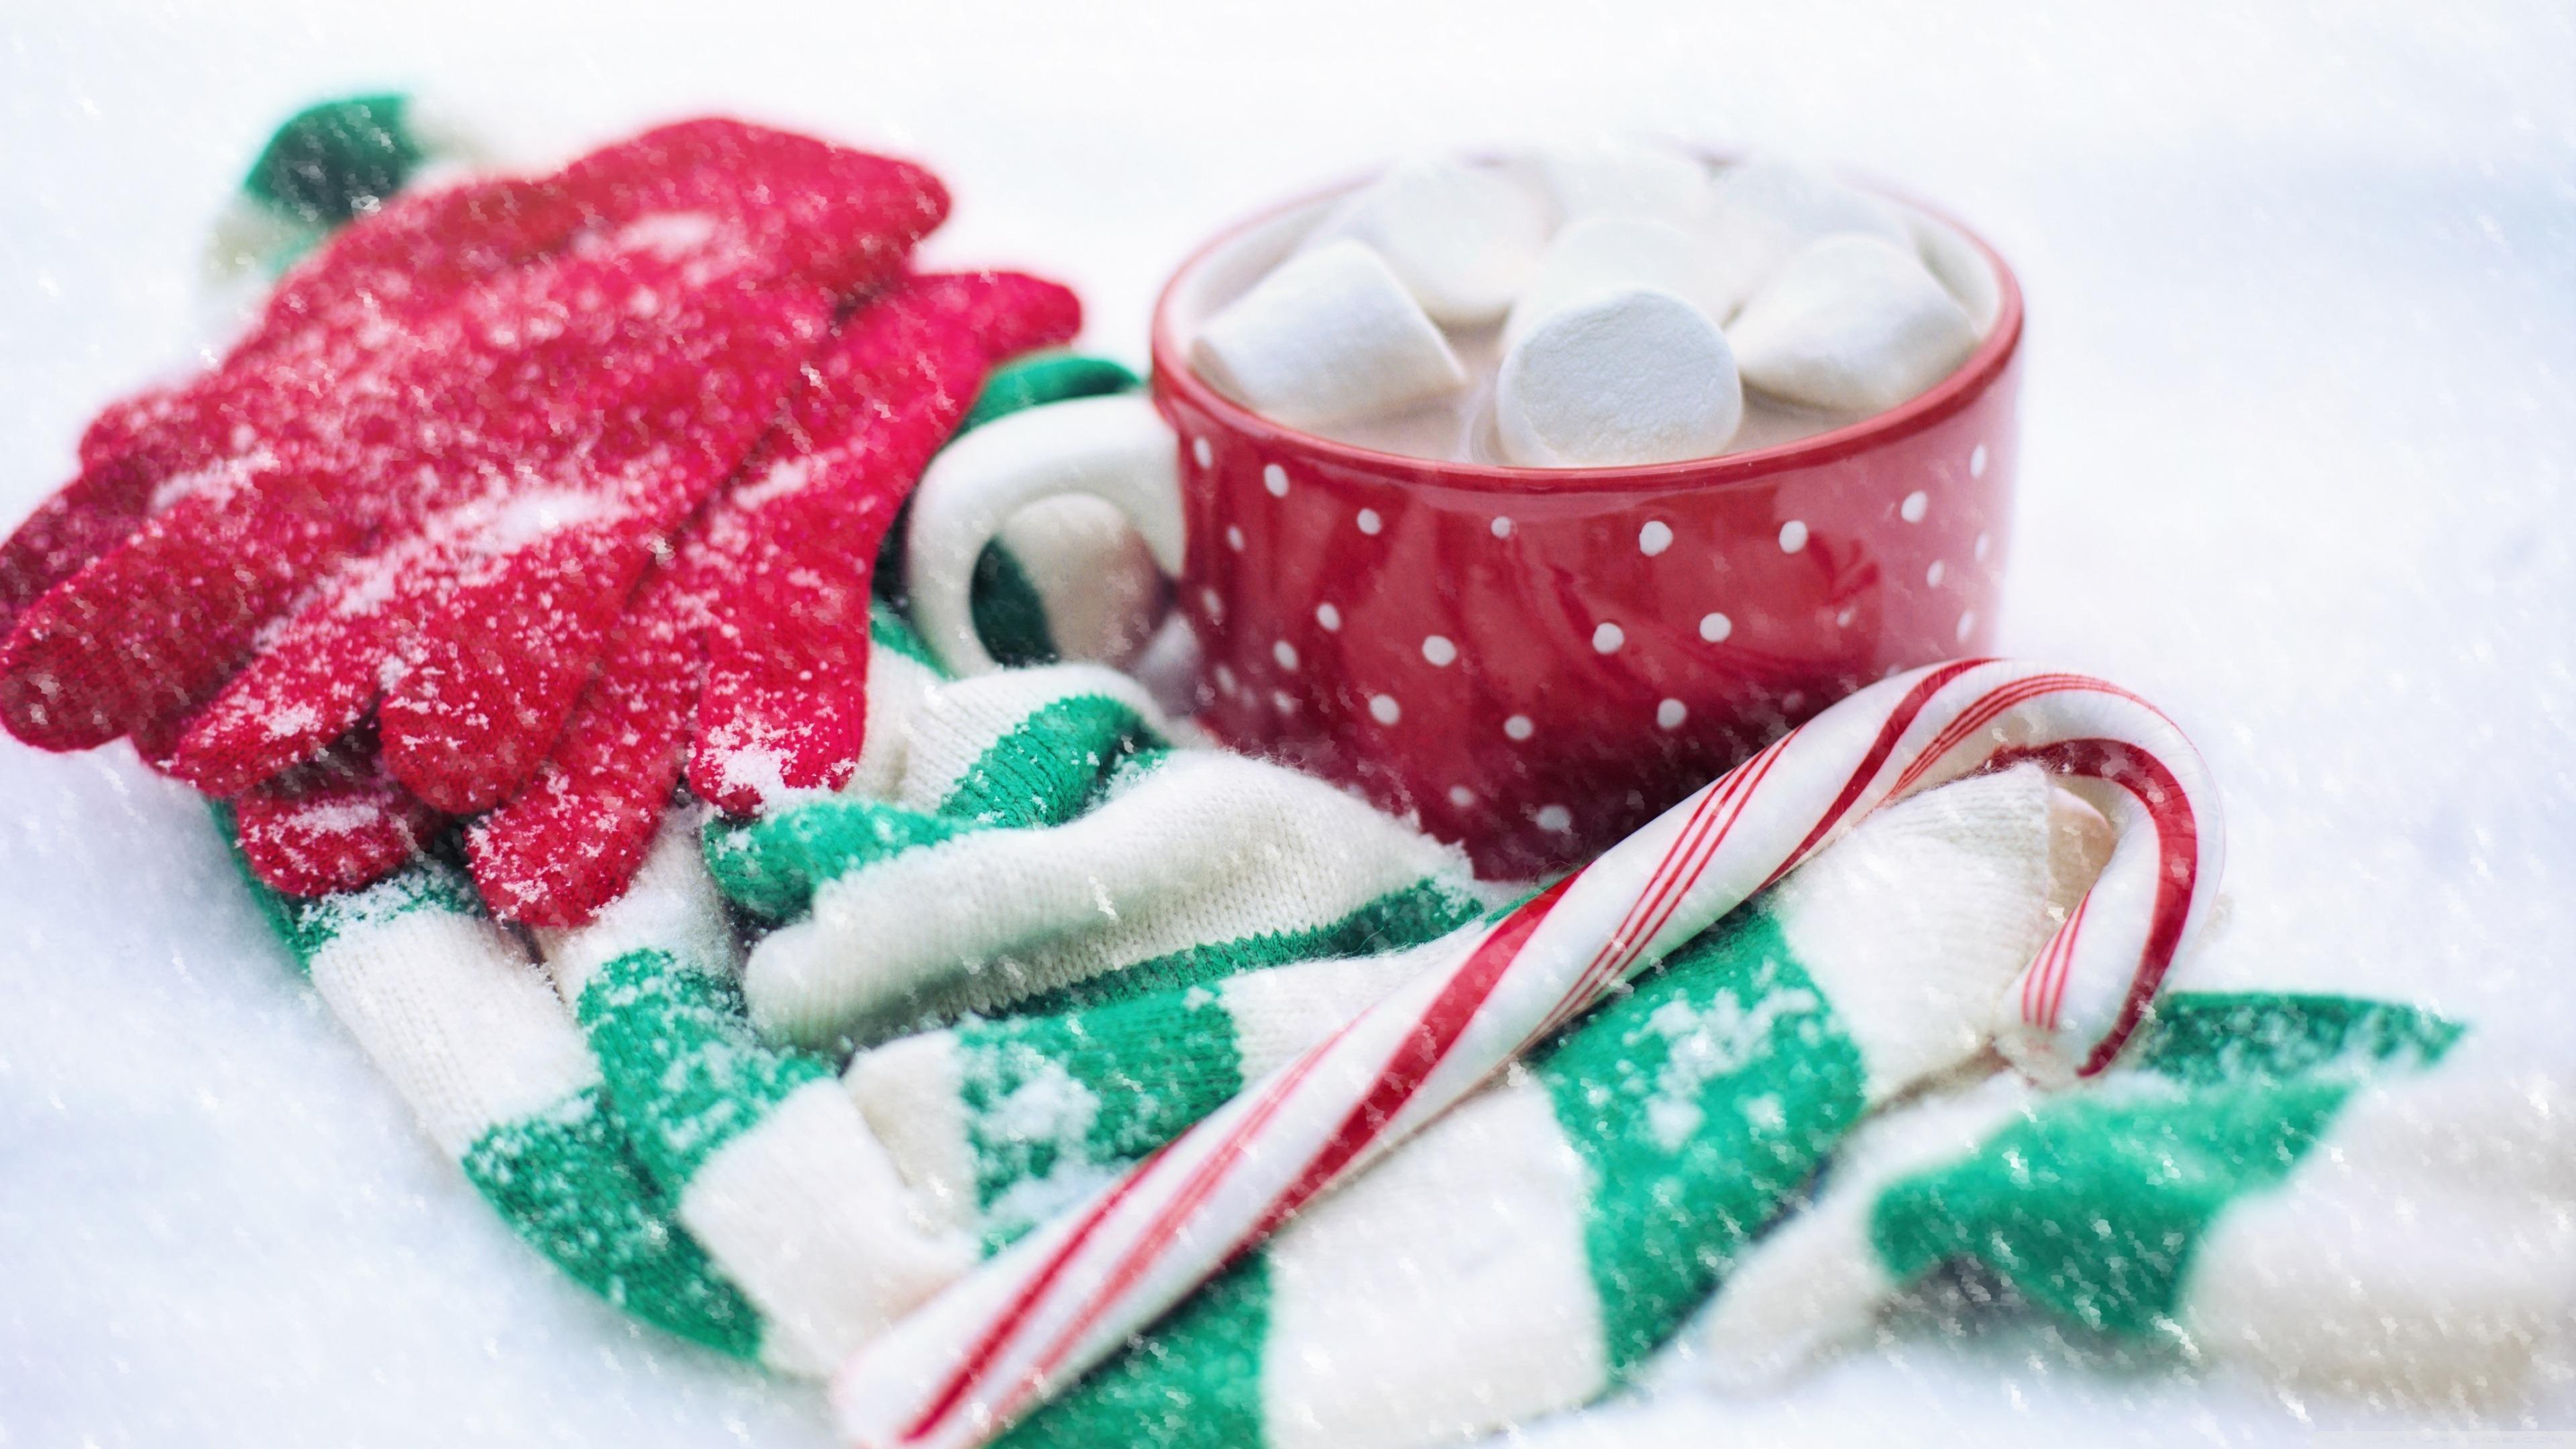 Hot Chocolate And Candy Cane In The Snow 4K UltraHD Wallpaper